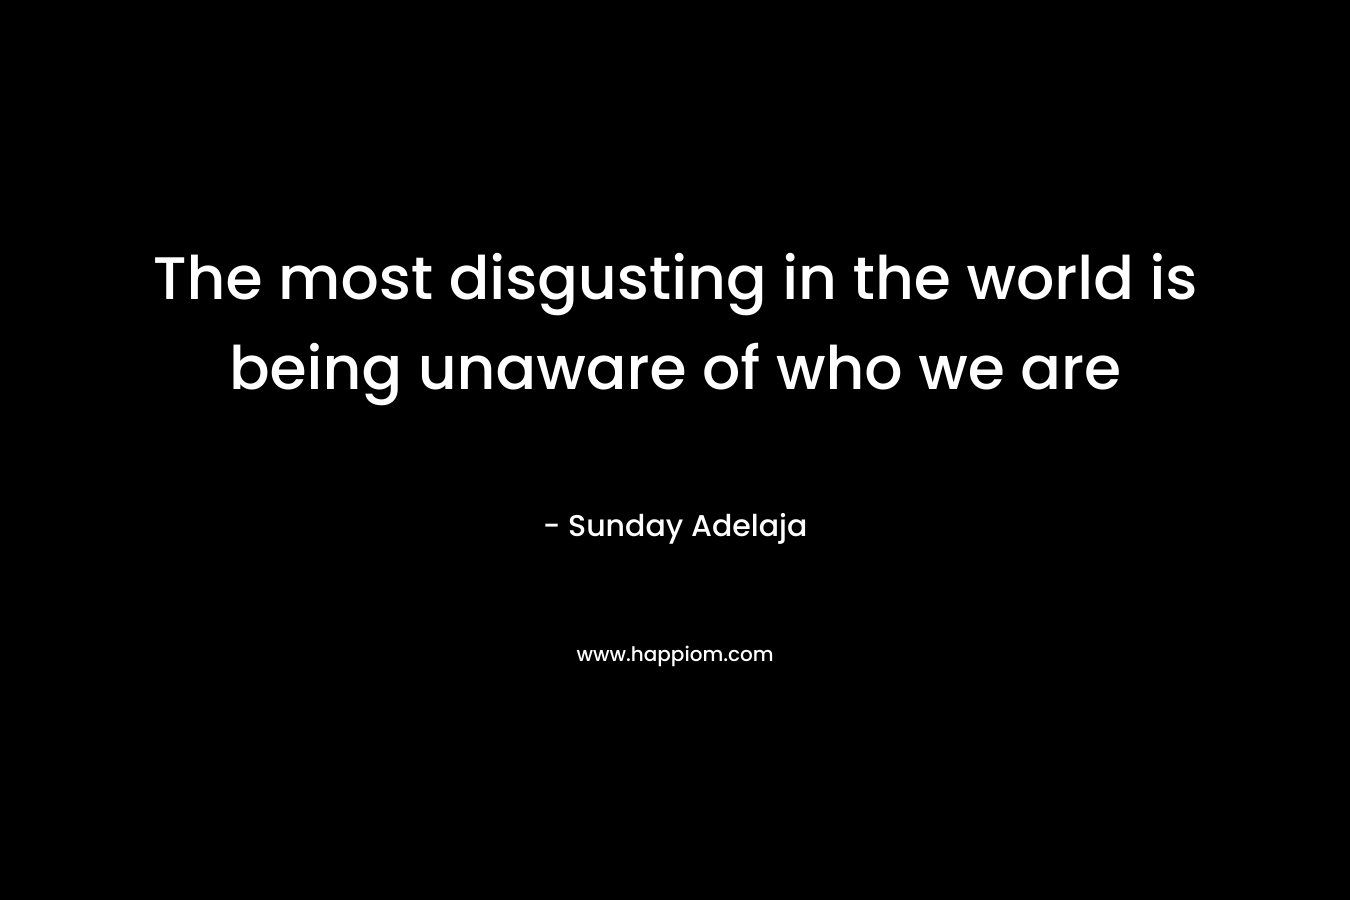 The most disgusting in the world is being unaware of who we are